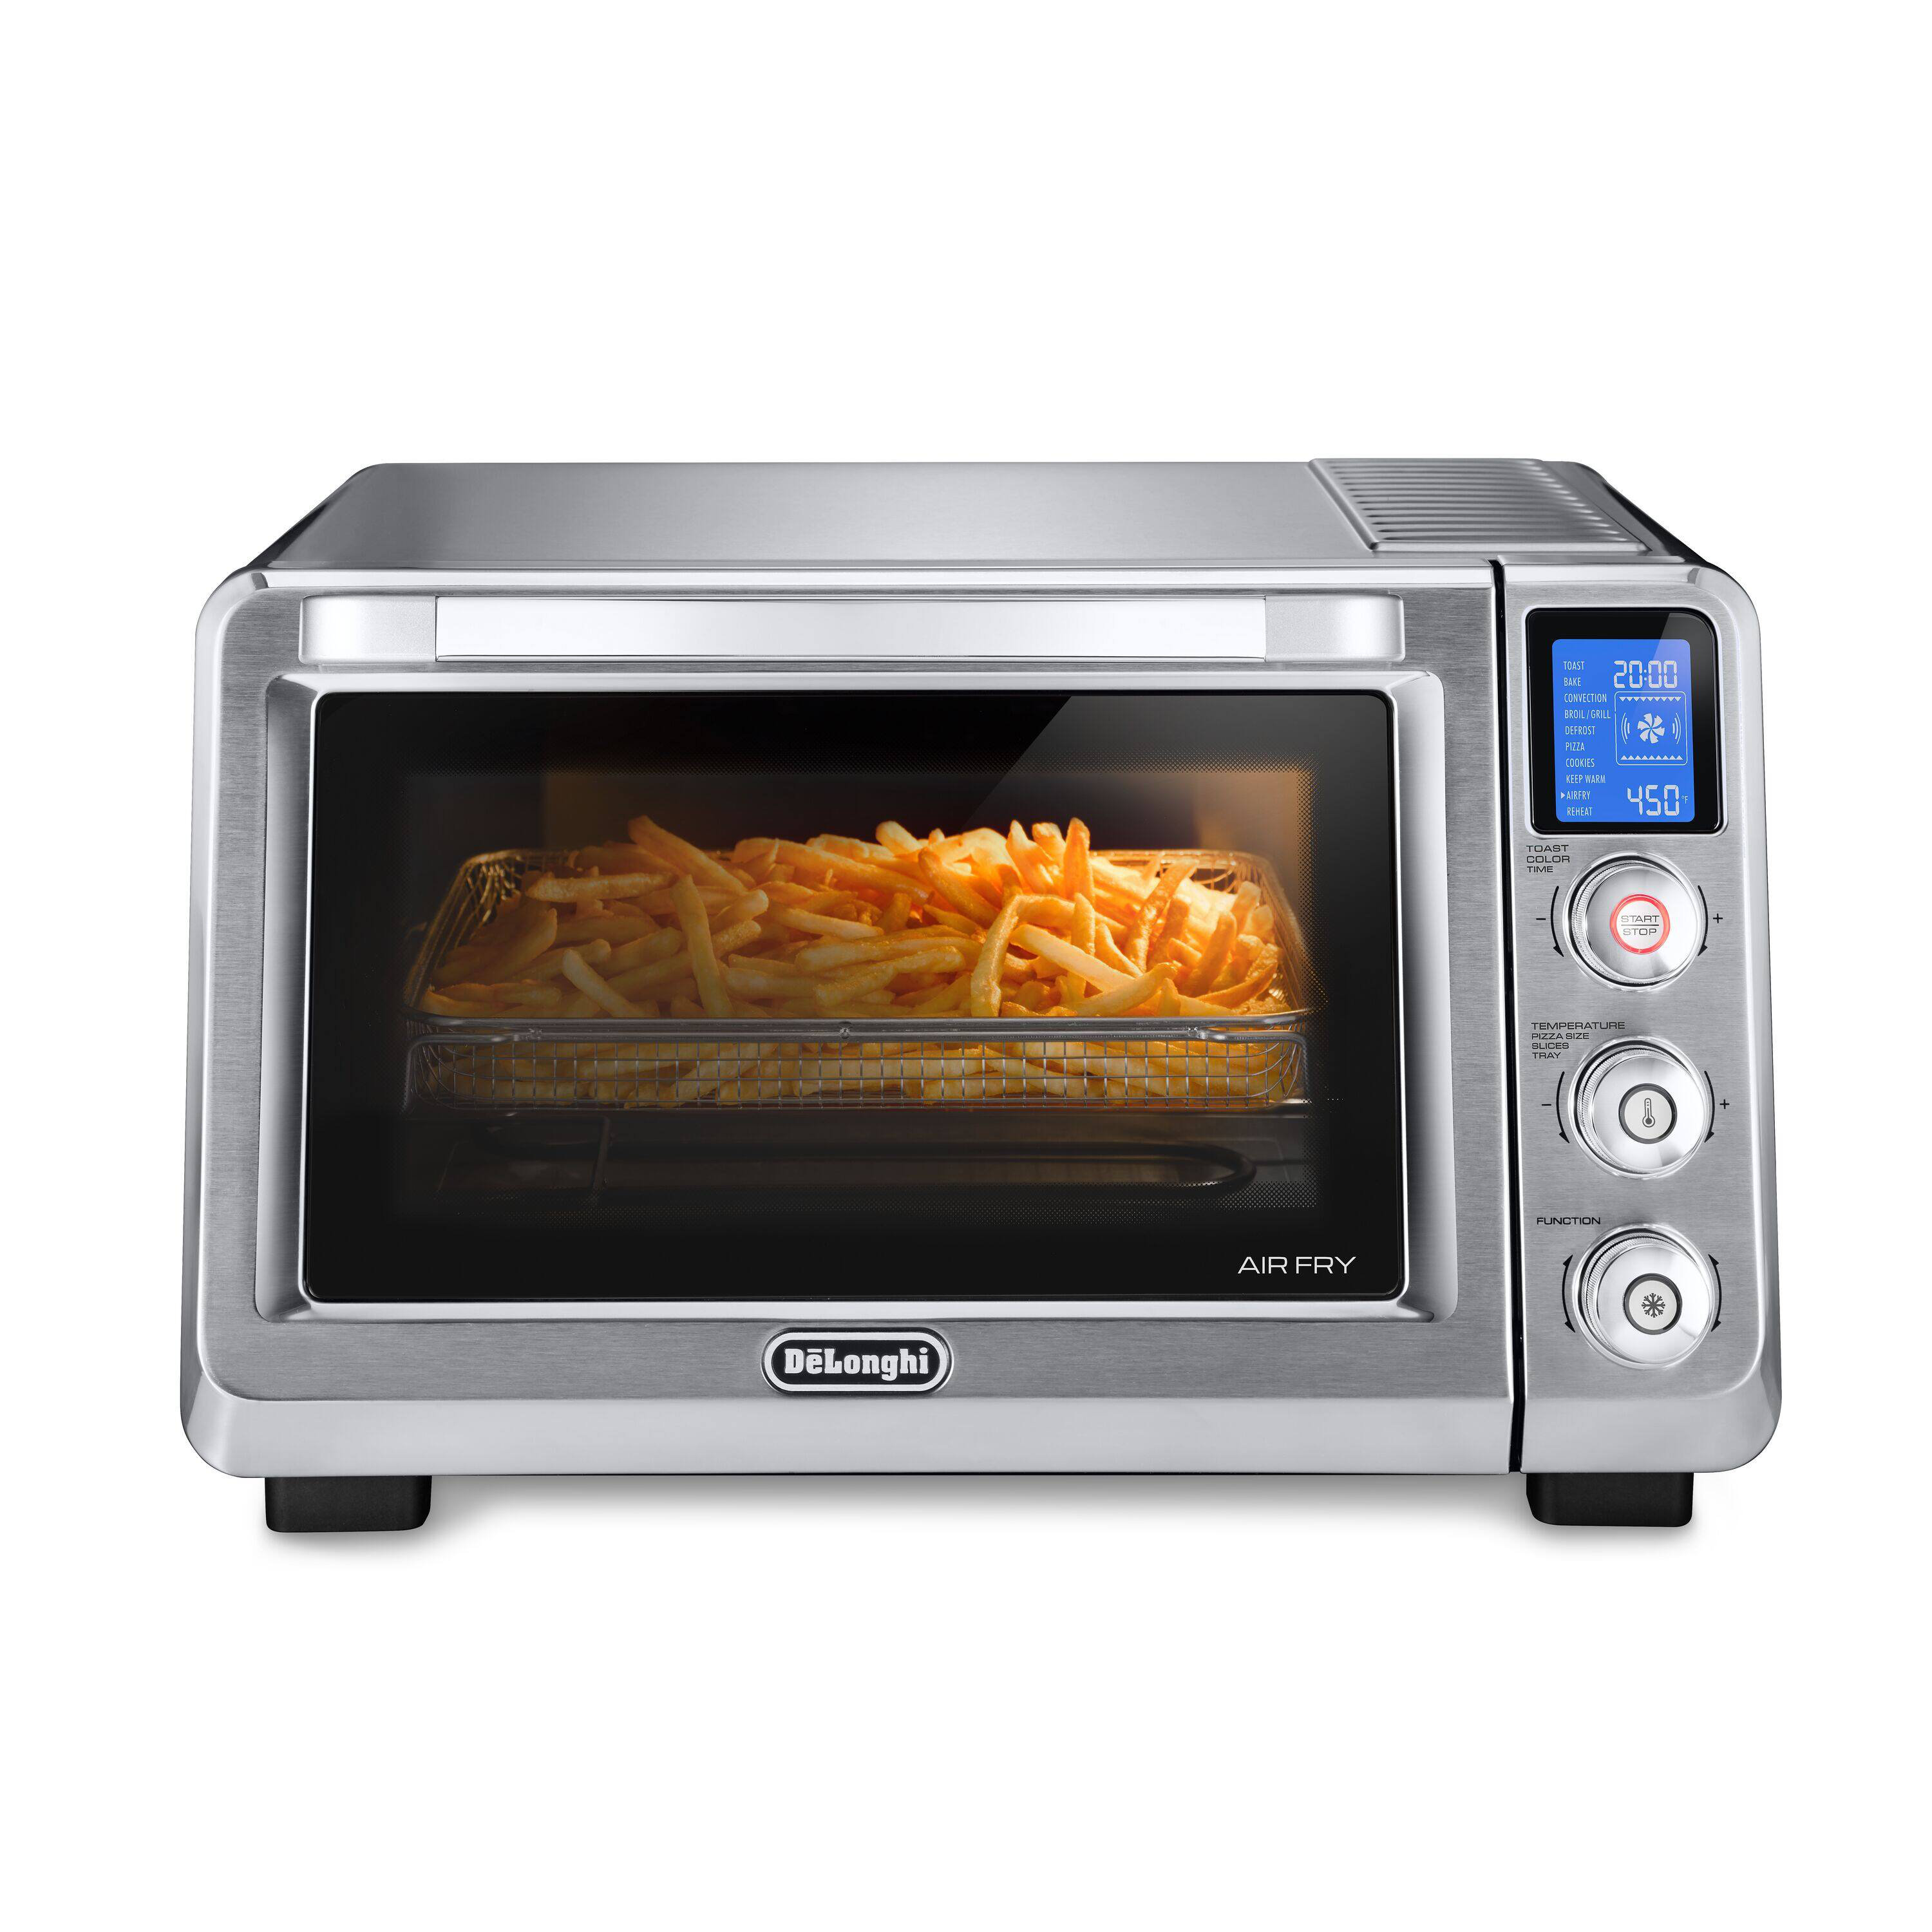 WHALL Air Fryer Oven, Max XL Large 30-Quart Smart Convection Oven,11-in-1  Toaster Oven with Steam Function,12-inch Pizza,6 slices of Toast, 4